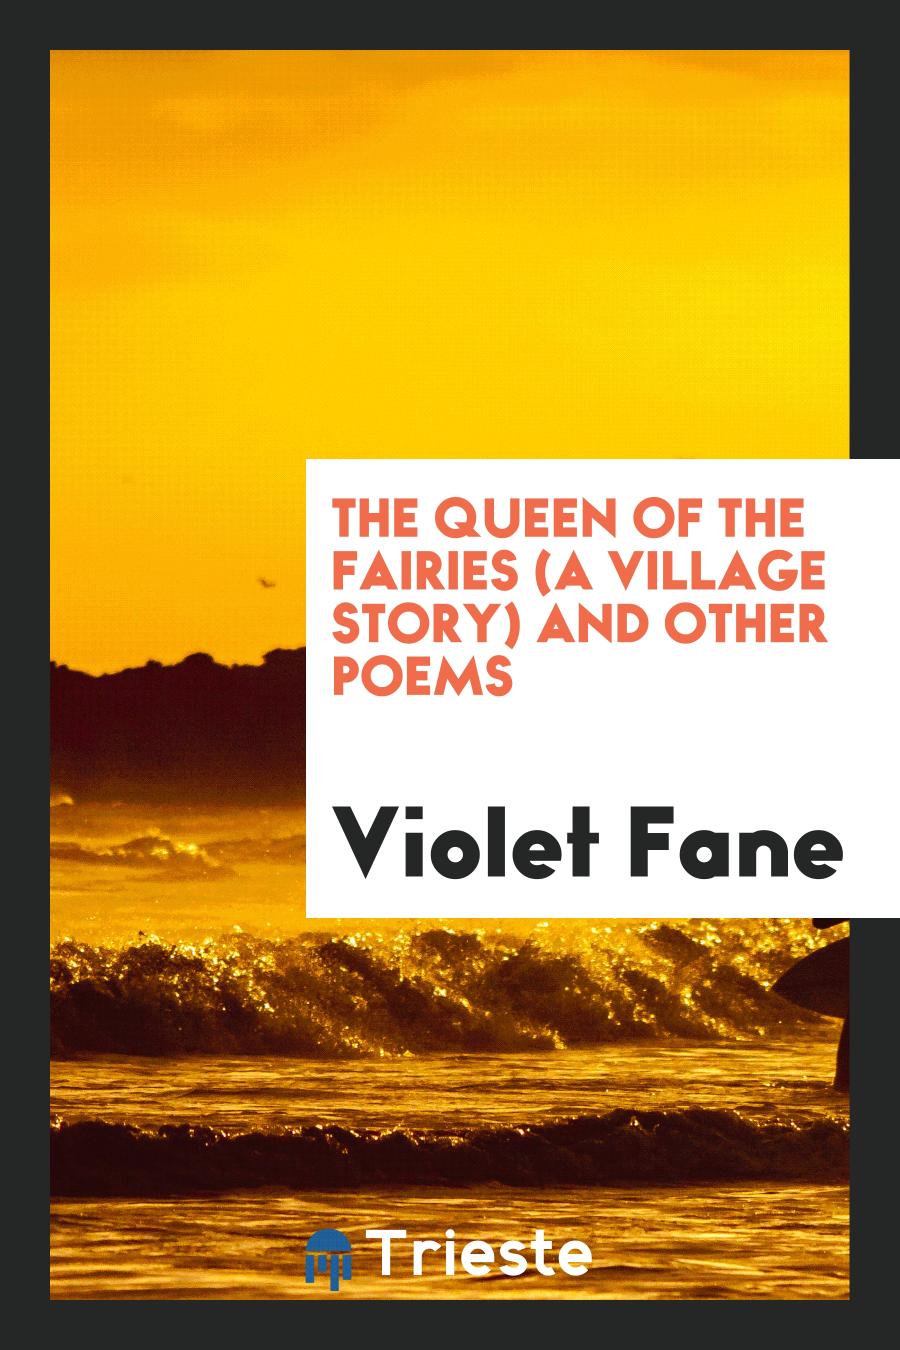 The Queen of the Fairies (a Village Story) and Other Poems